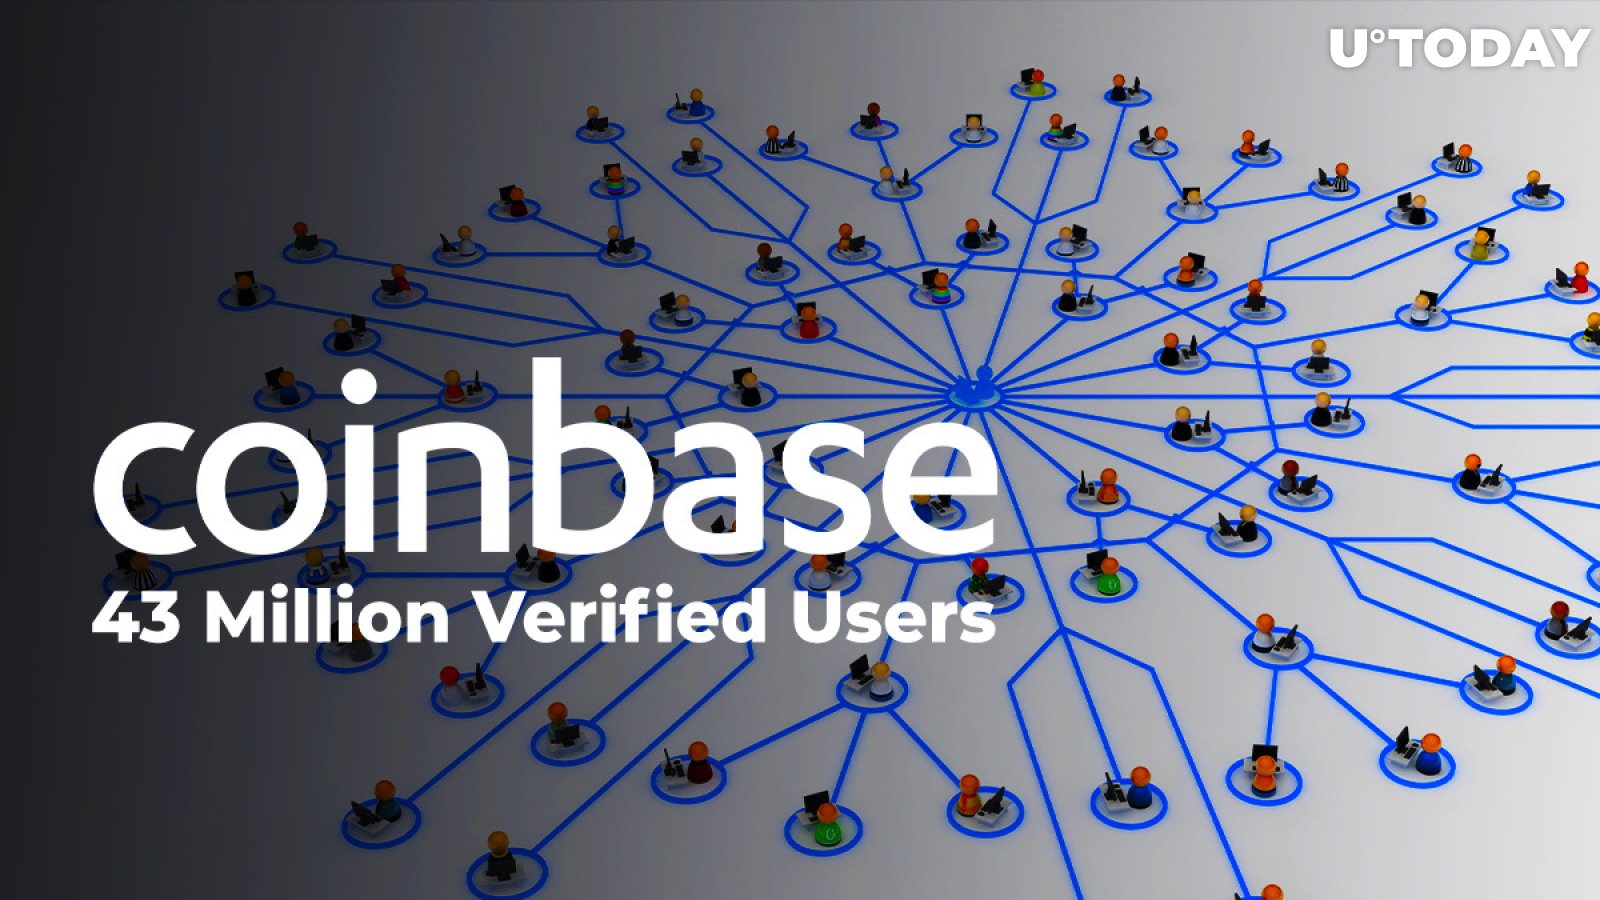 Coinbase Keeps $90+ Billion in Assets While Its Number of Verified Users Totals 43 Million